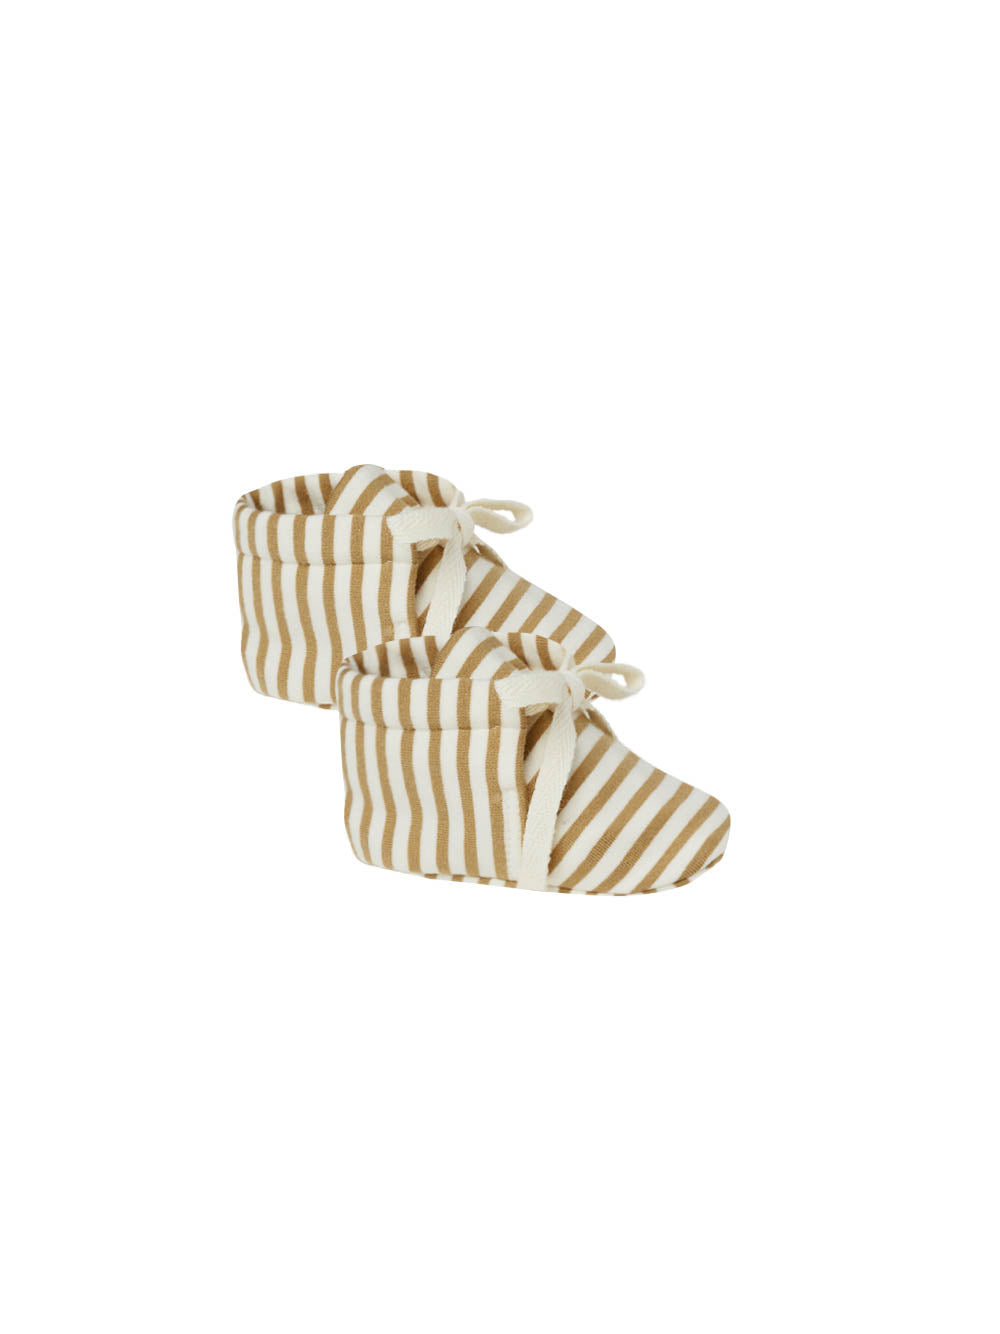 QUINCY MAE BABY BOOTIES / GOLD STRIPE